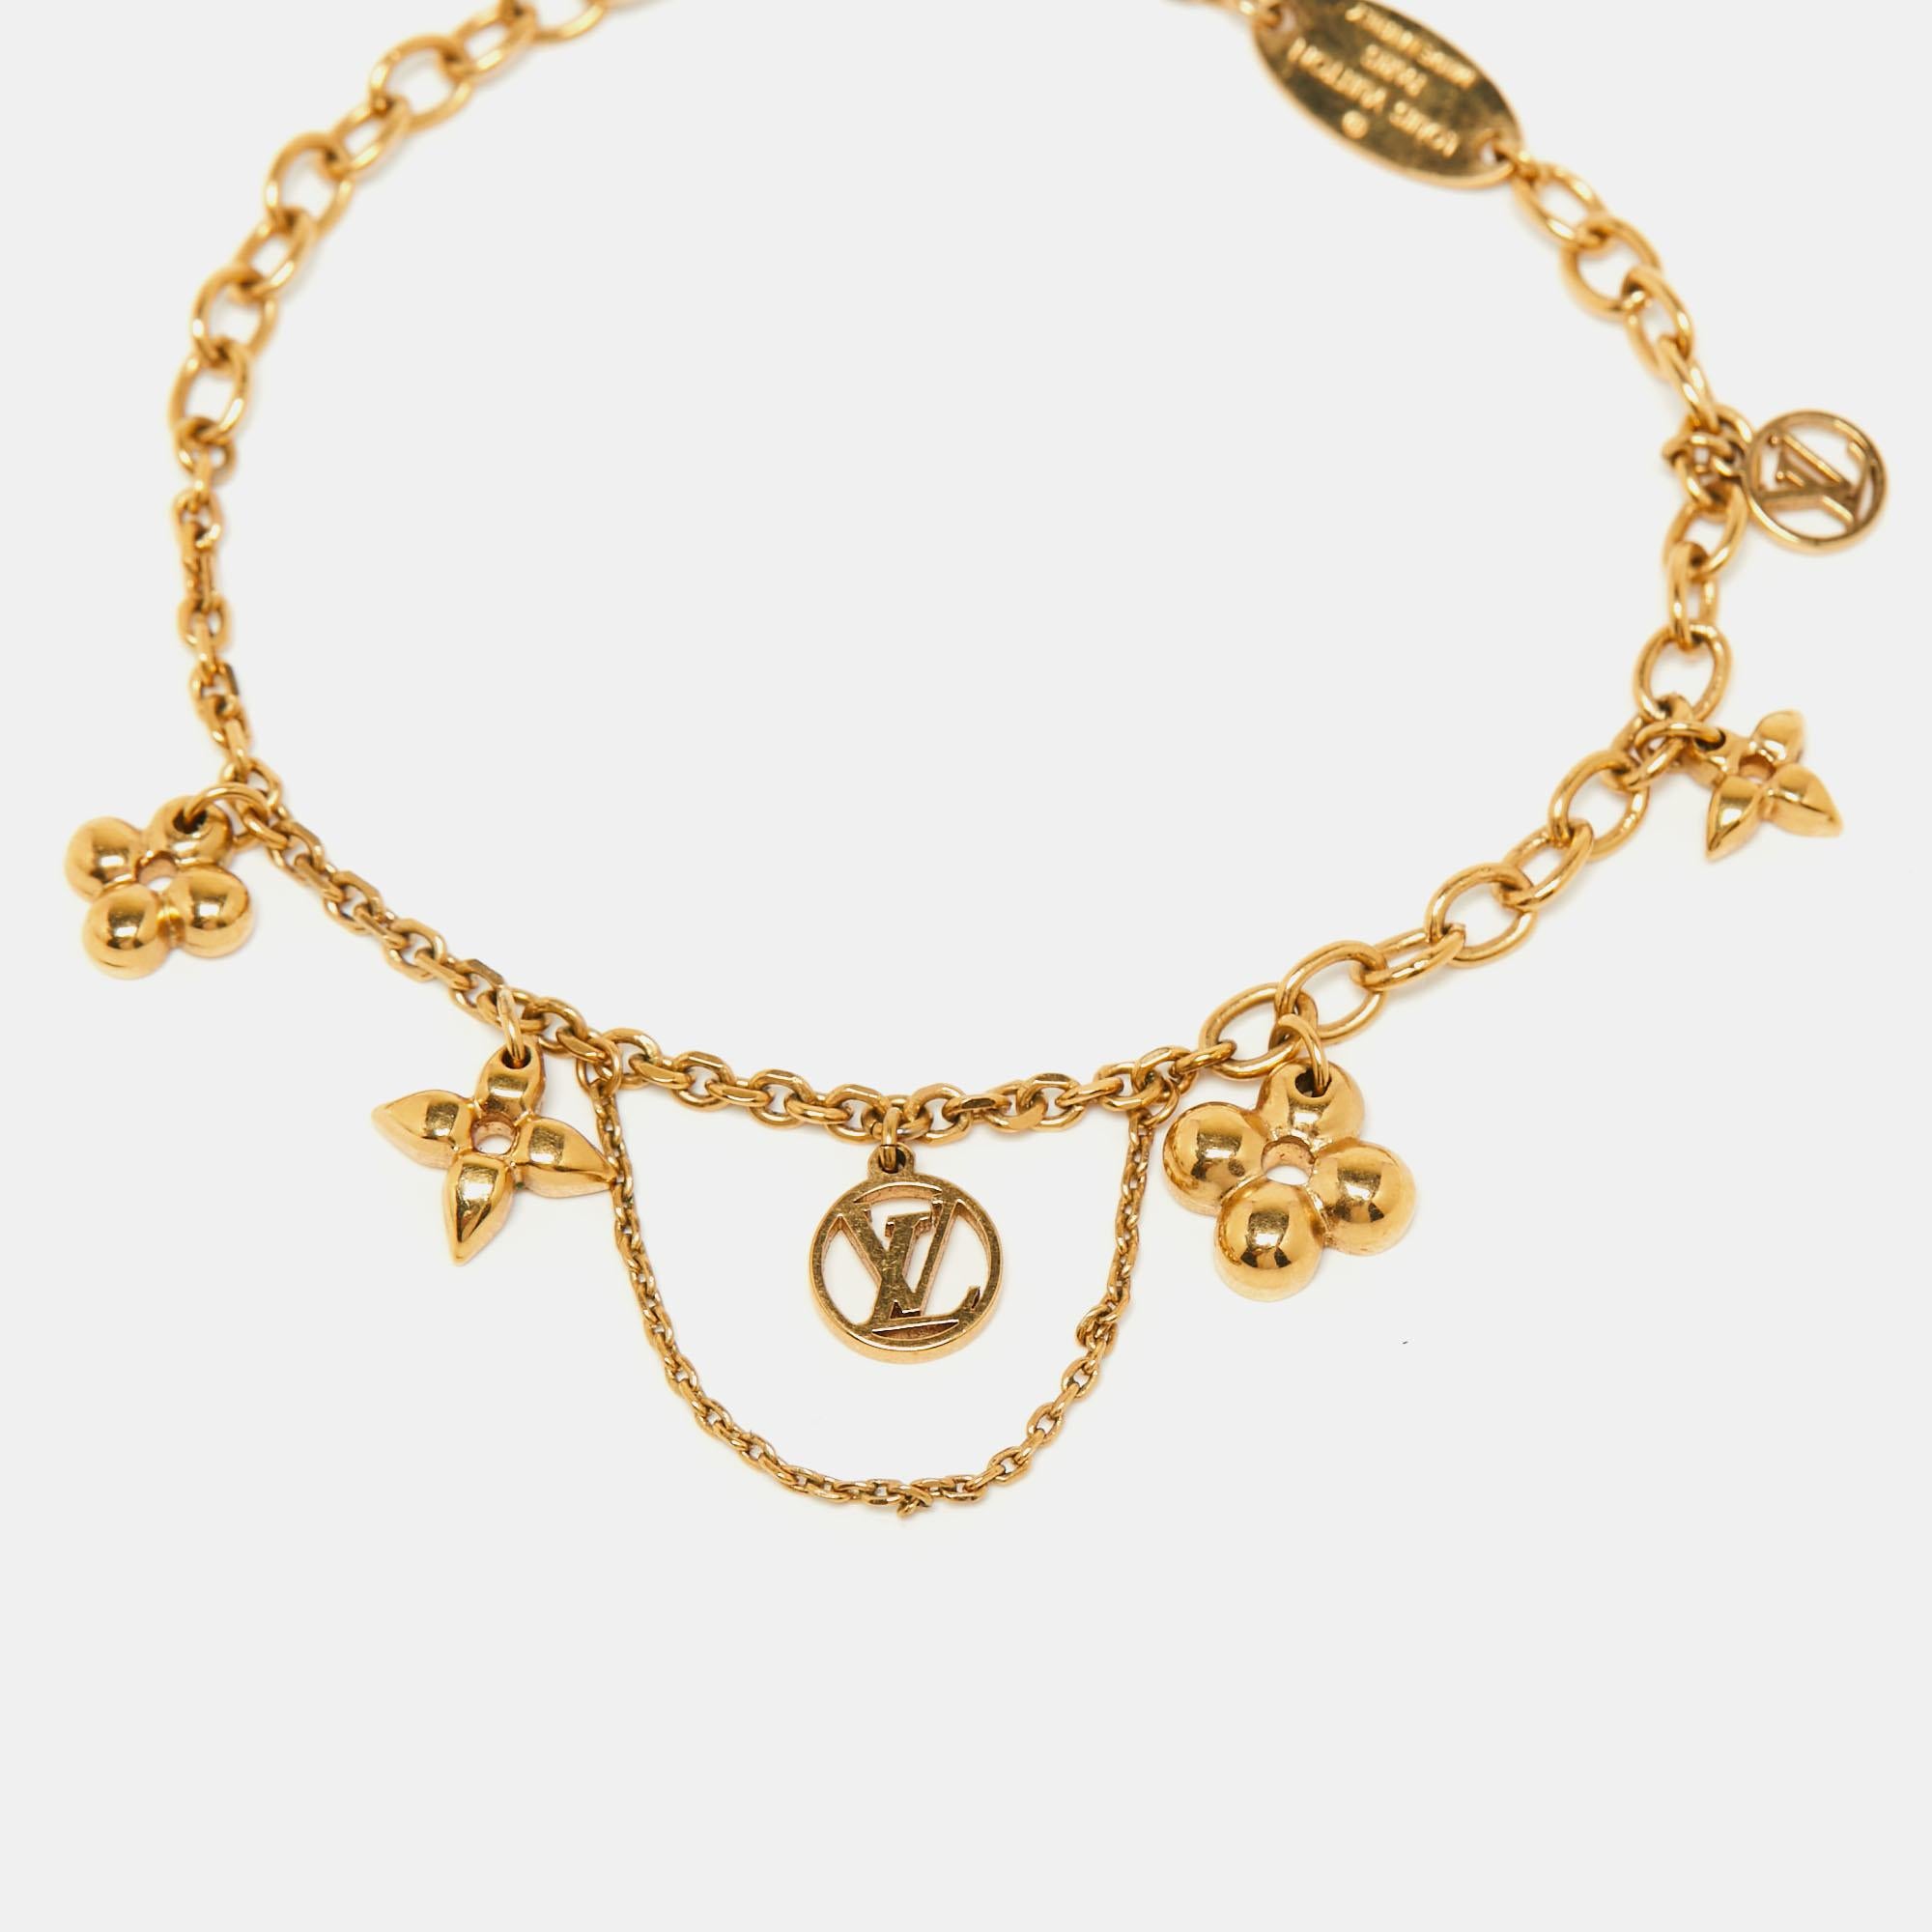 Louis Vuitton Blooming Bracelet - For Sale on 1stDibs